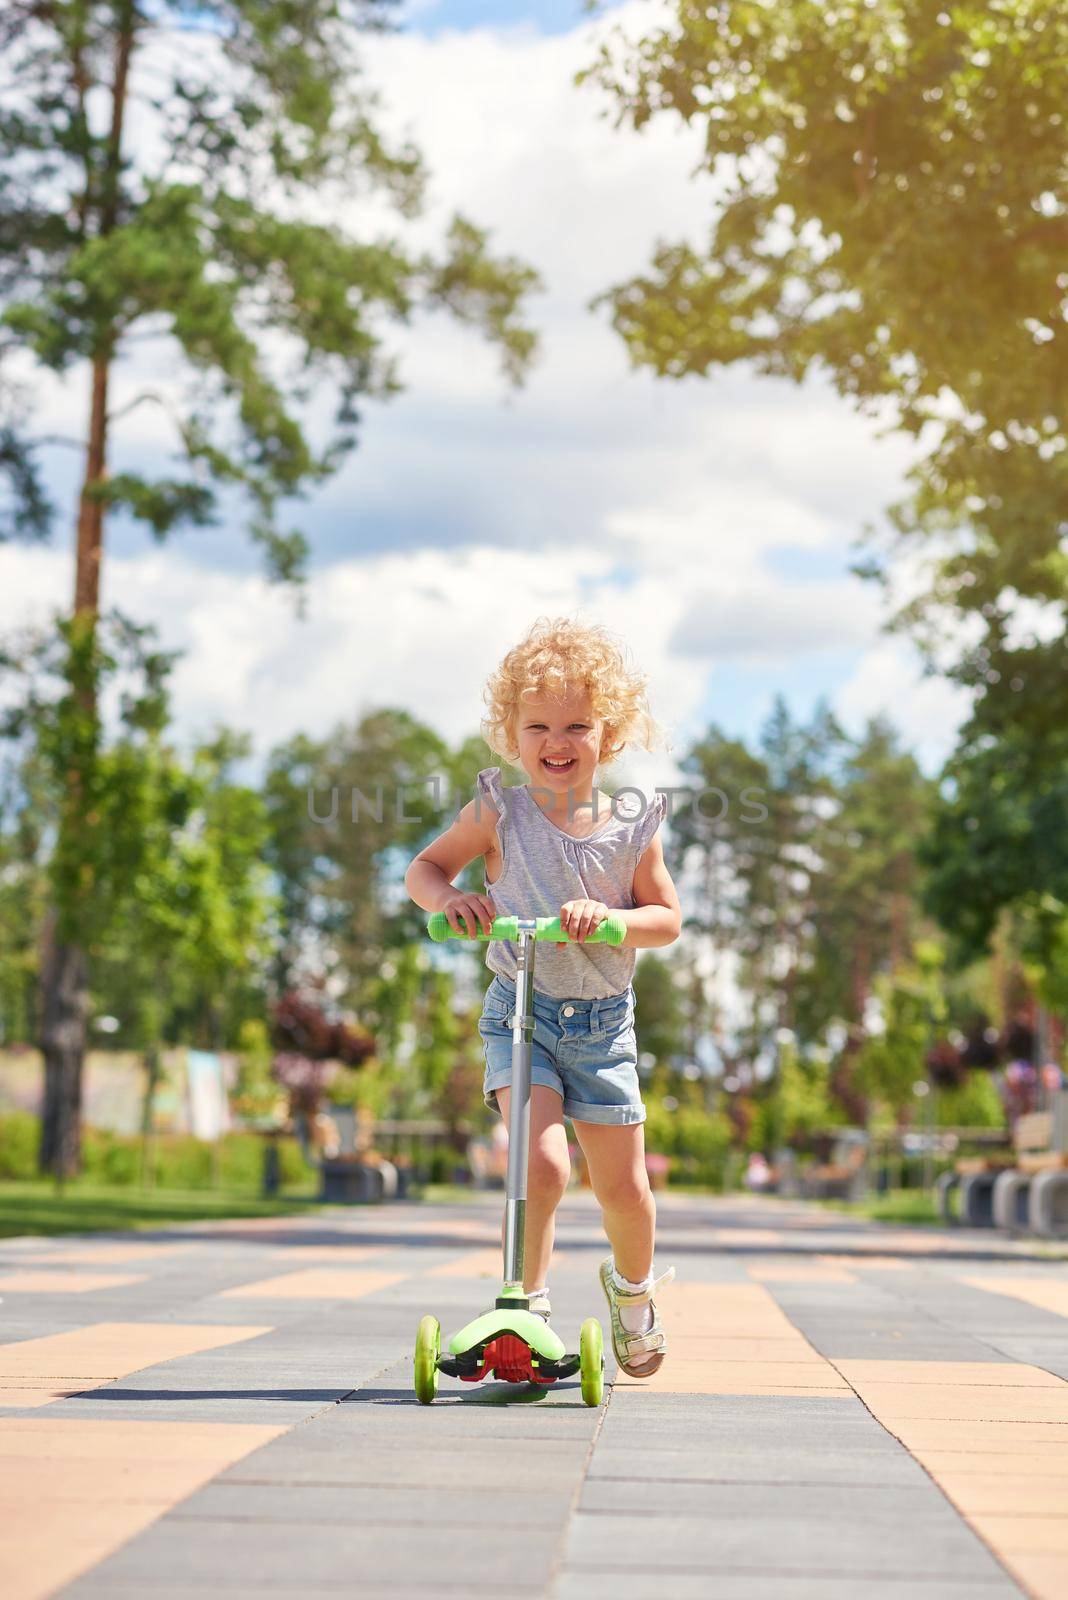 Vertical full length shot of a cute blonde little girl riding scooter at the park kids children happiness emotions activity concept.